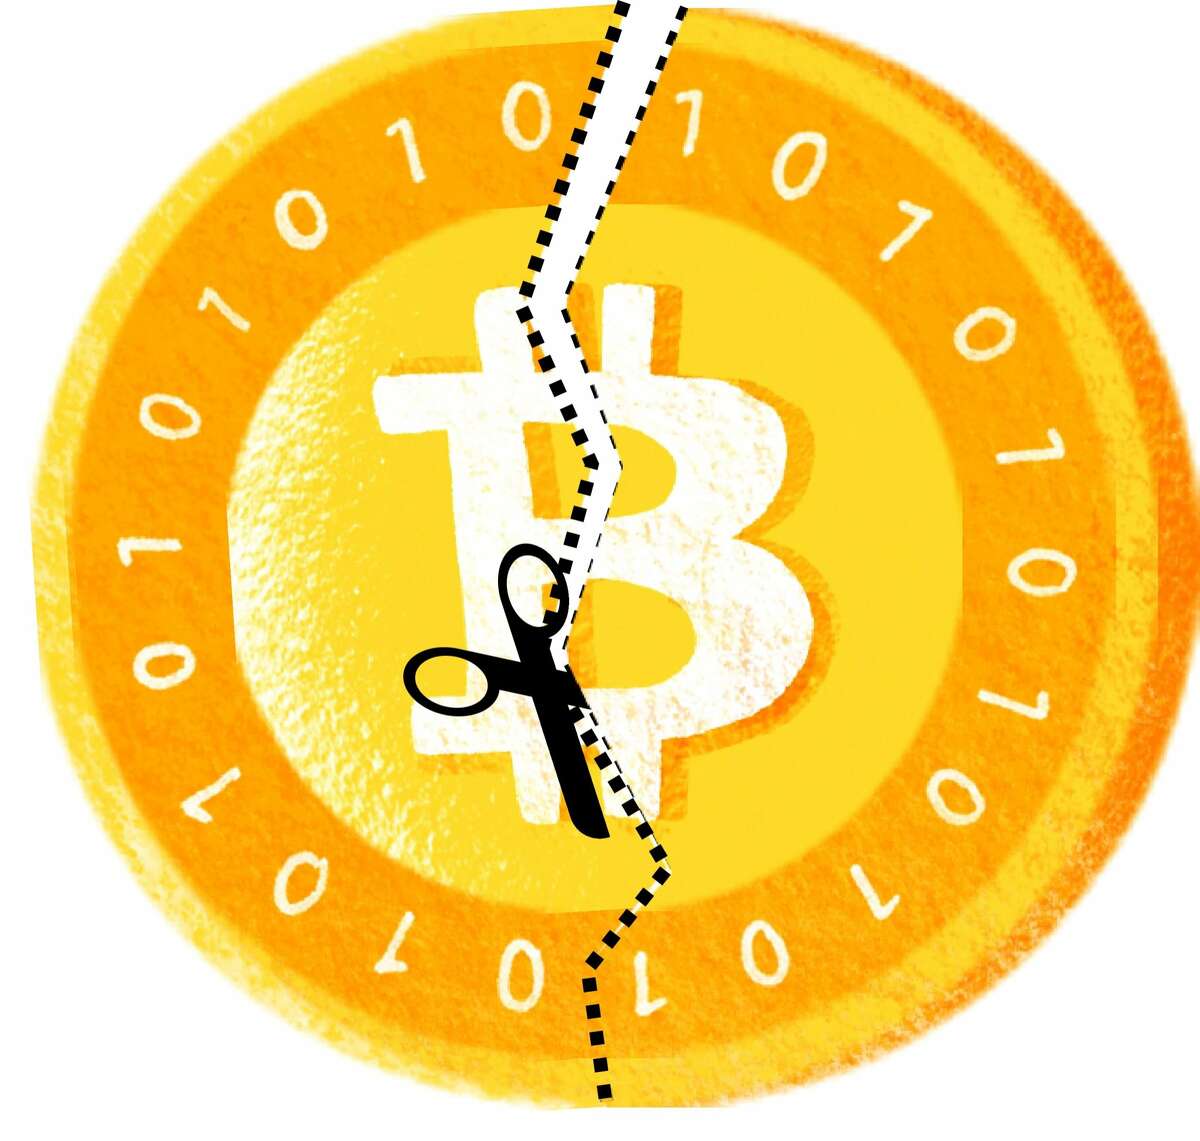 the politics of bitcoin software as right wing extremism